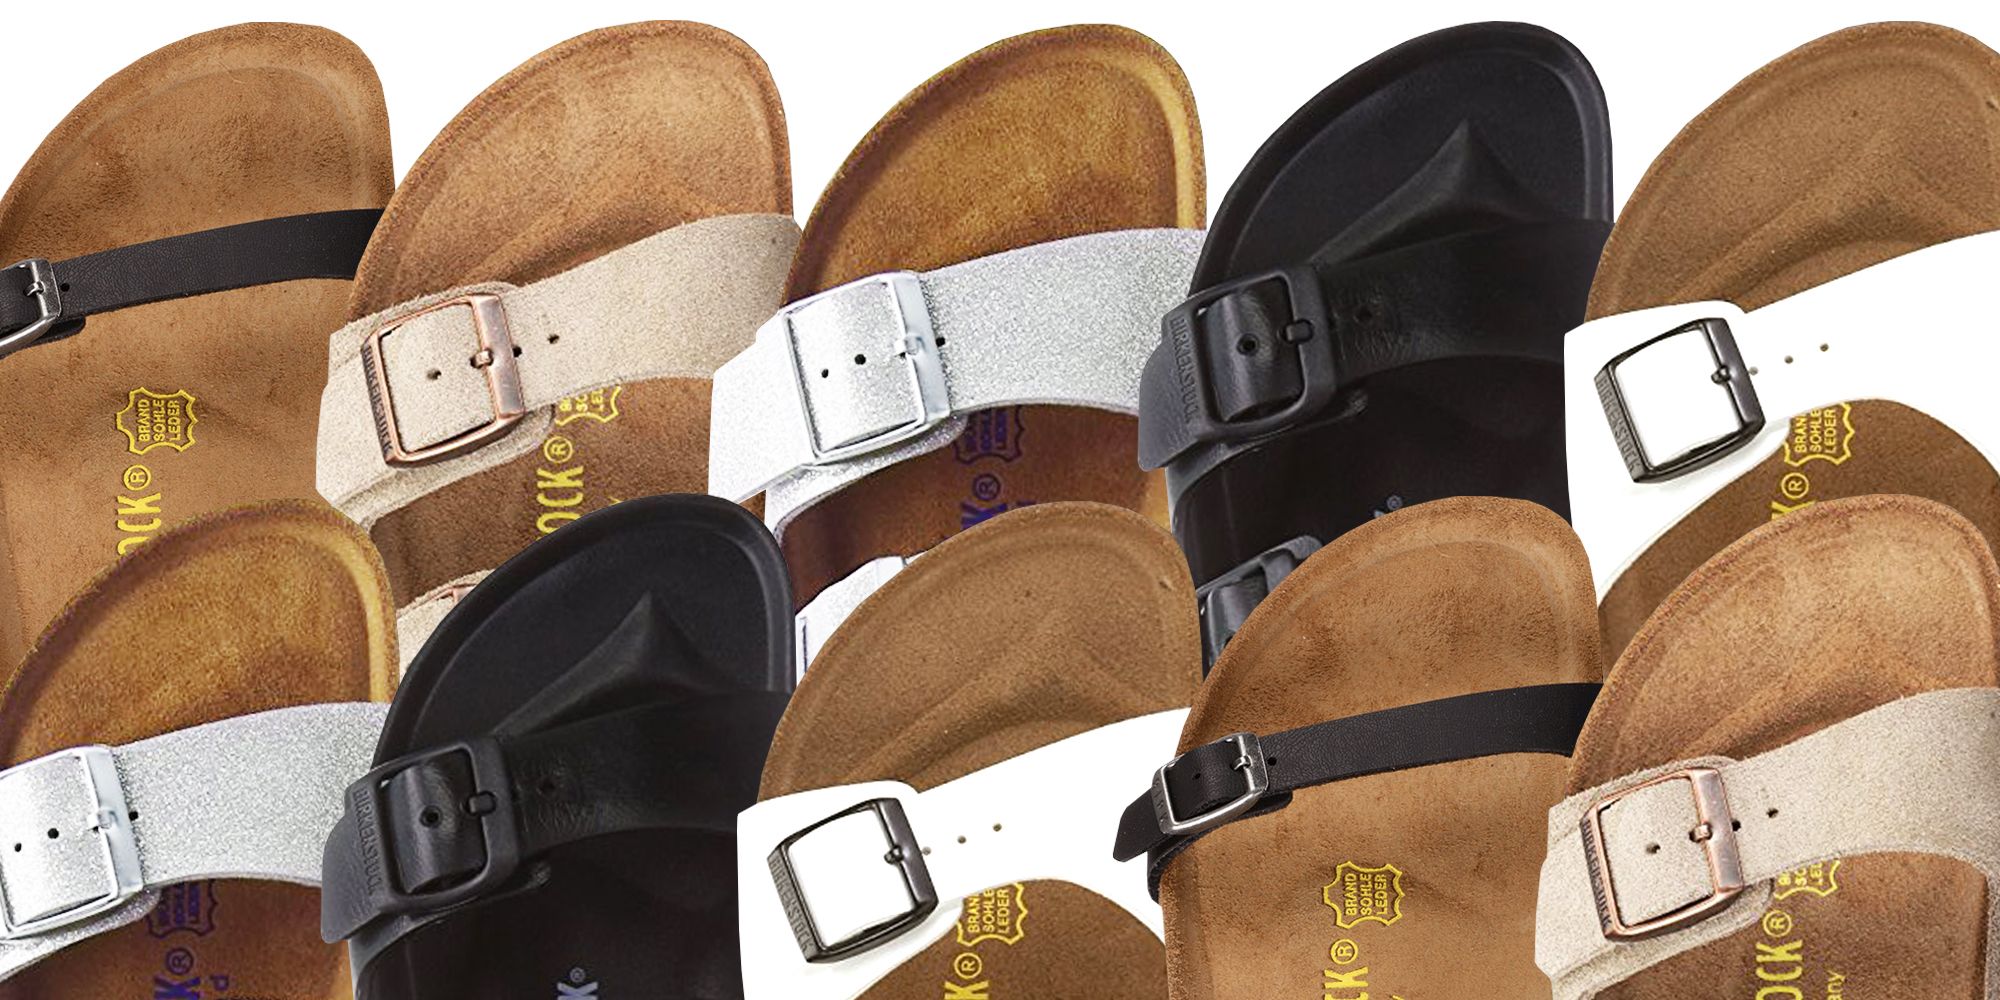 where is the cheapest place to buy birkenstocks